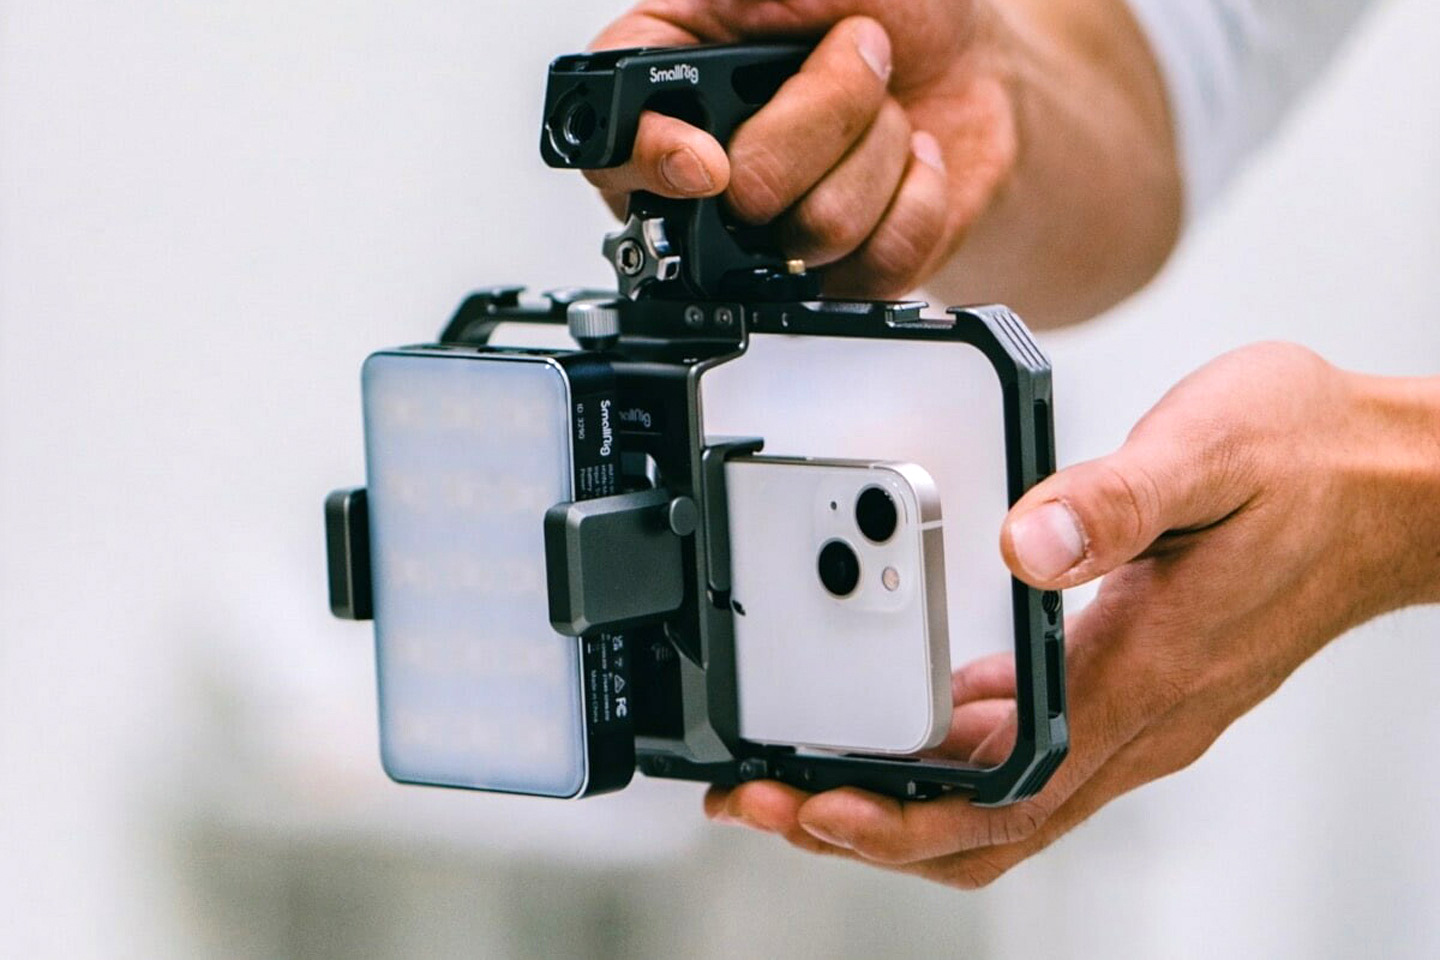 #Turn your iPhone into a professional film-making setup with this modular phone-rig